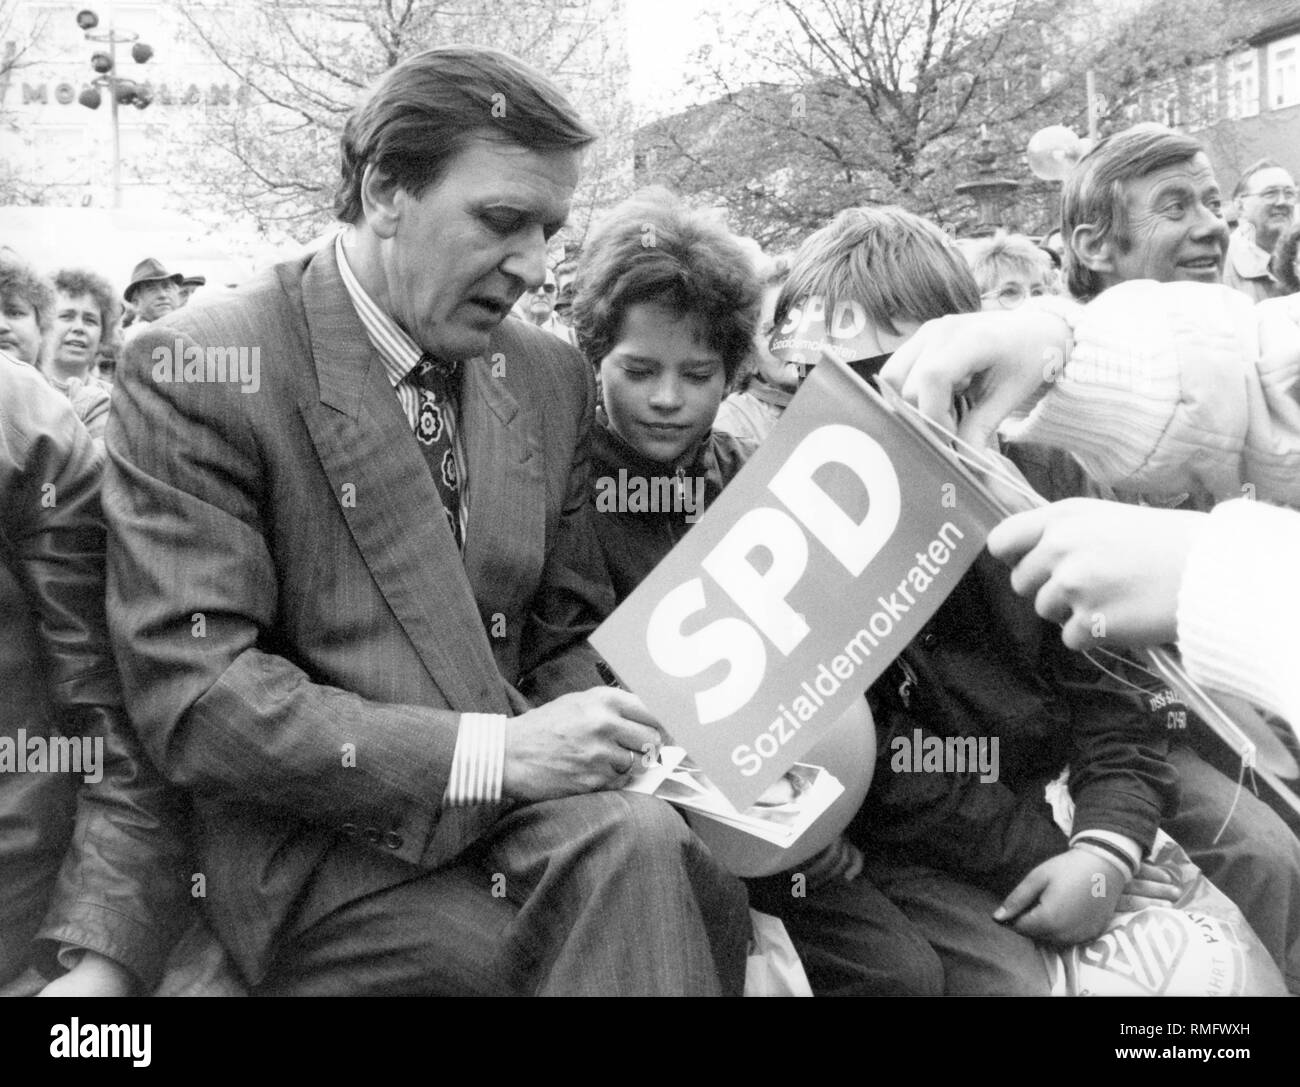 The SPD top candidate in the state election in Lower Saxony, Gerhard Schroeder, gives a boy an autograph. Stock Photo